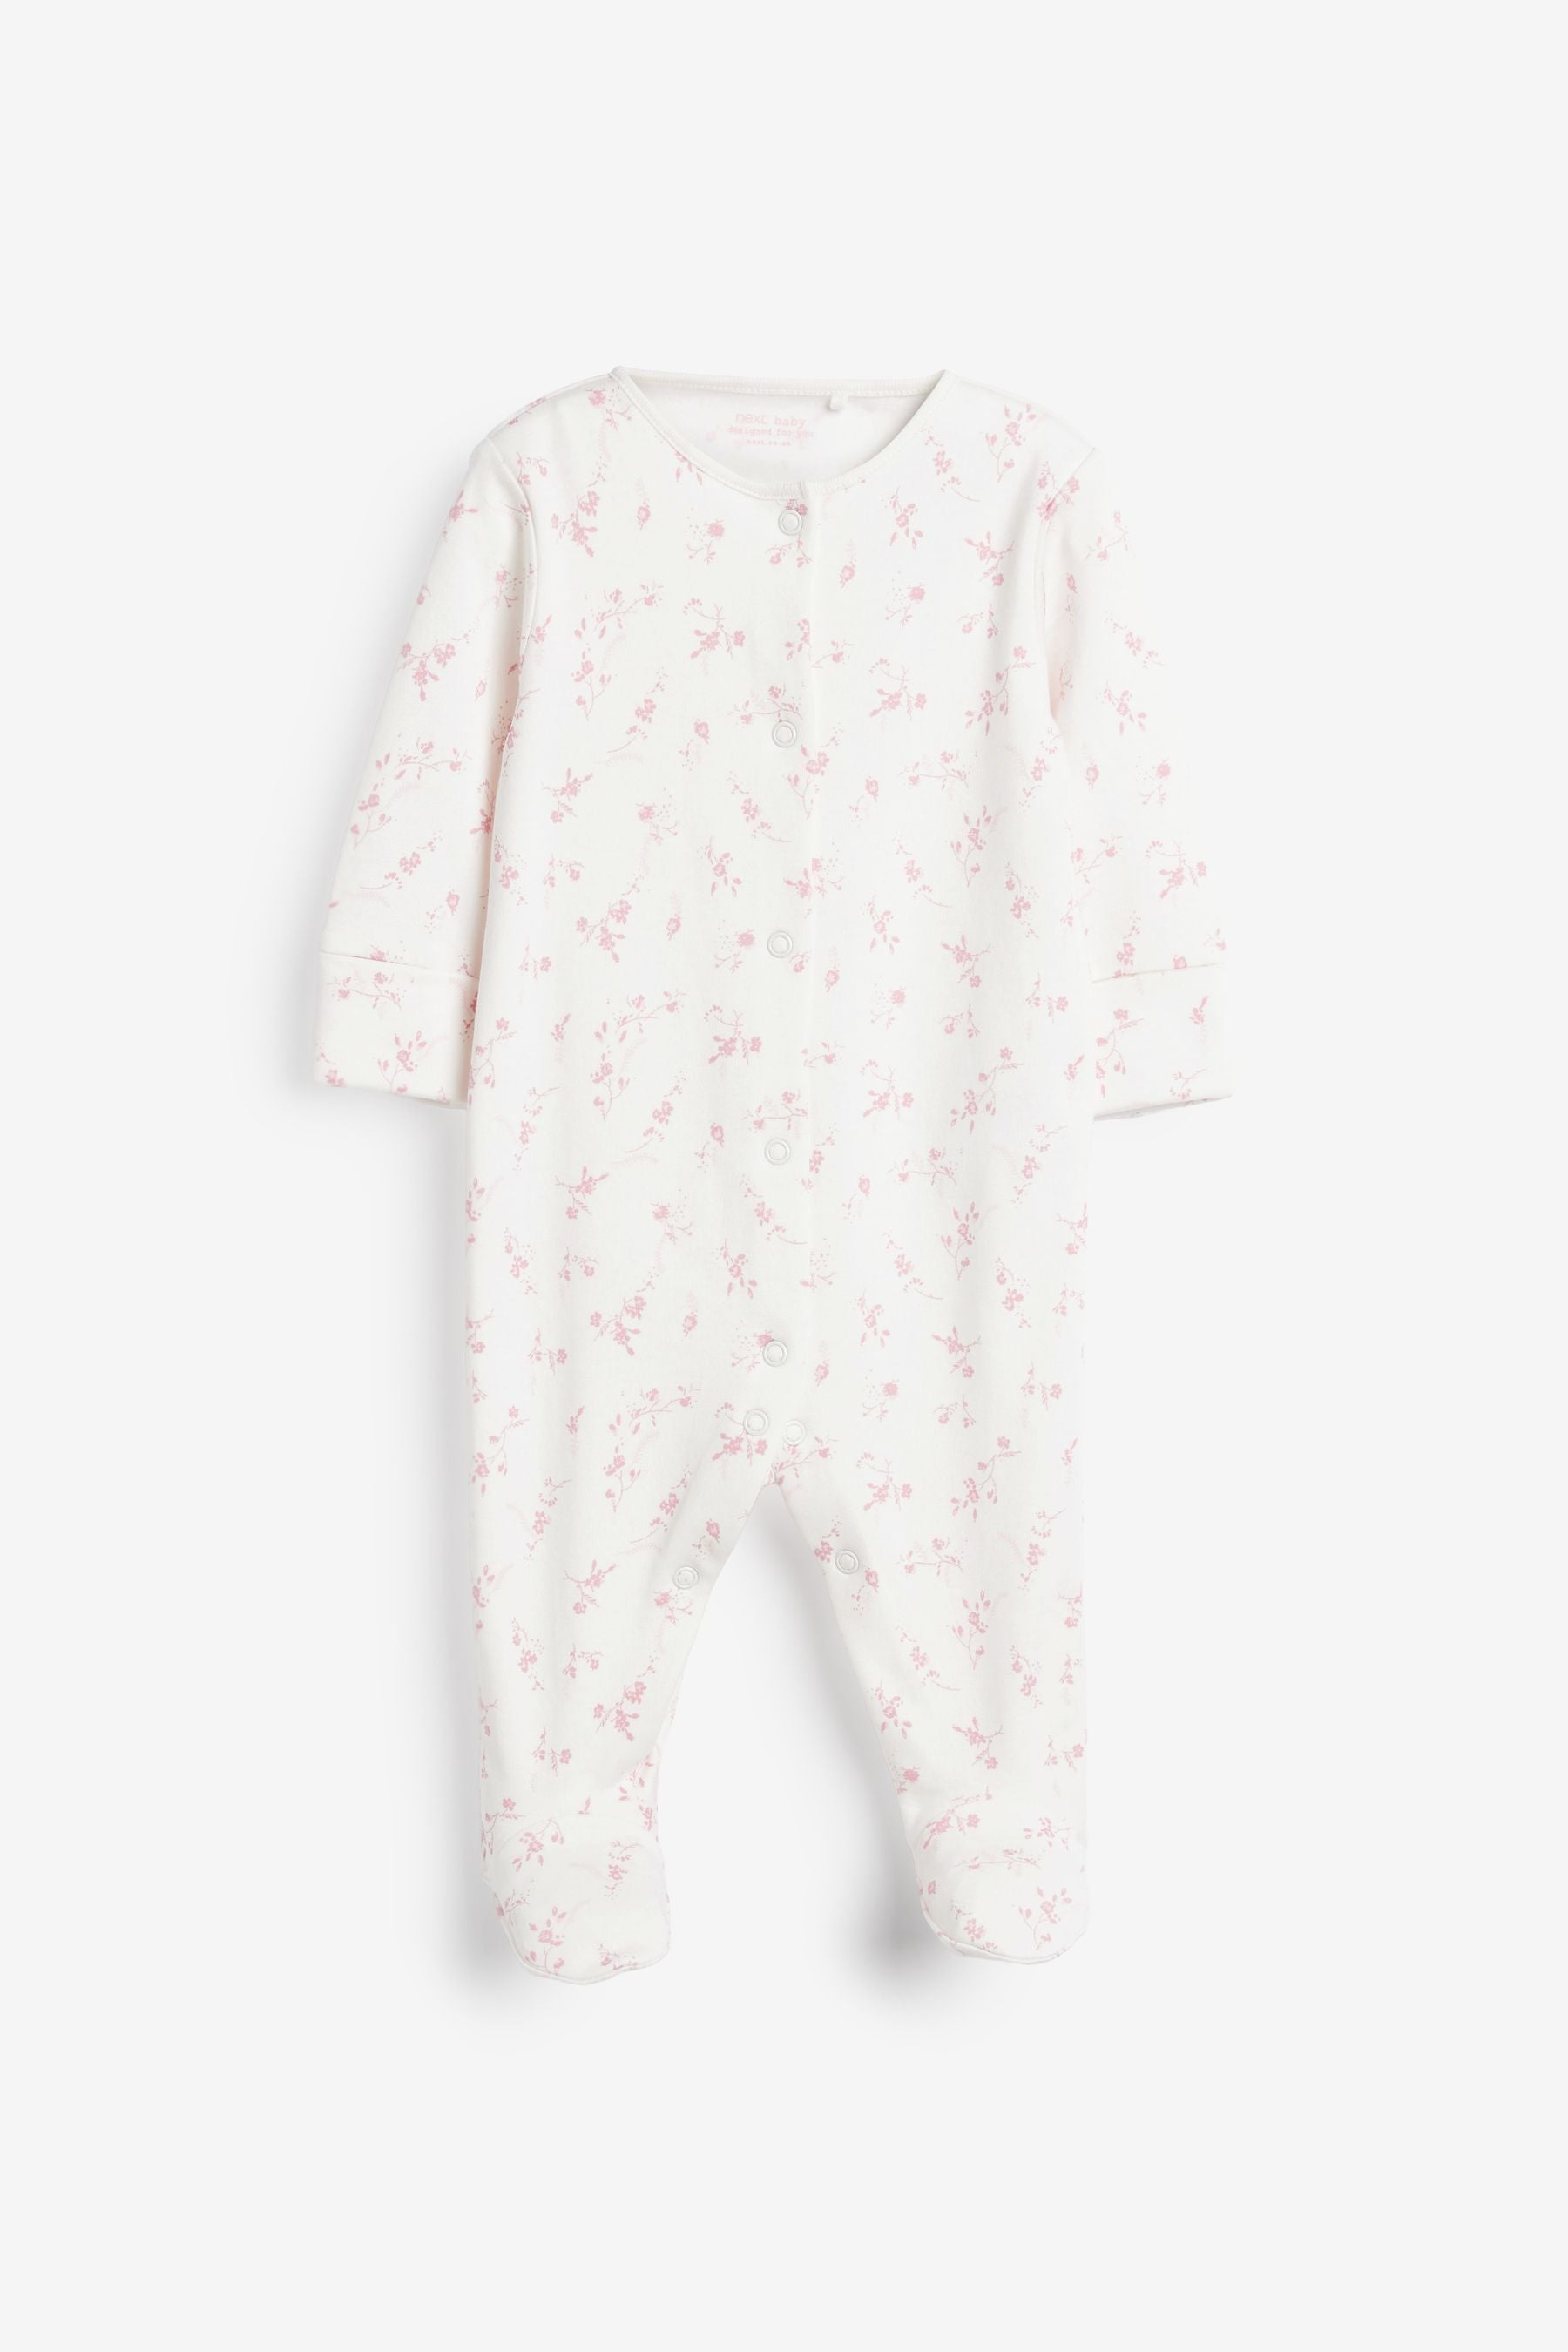 Pink Floral Baby Sleepsuits 5 Pack (0mths-2yrs)